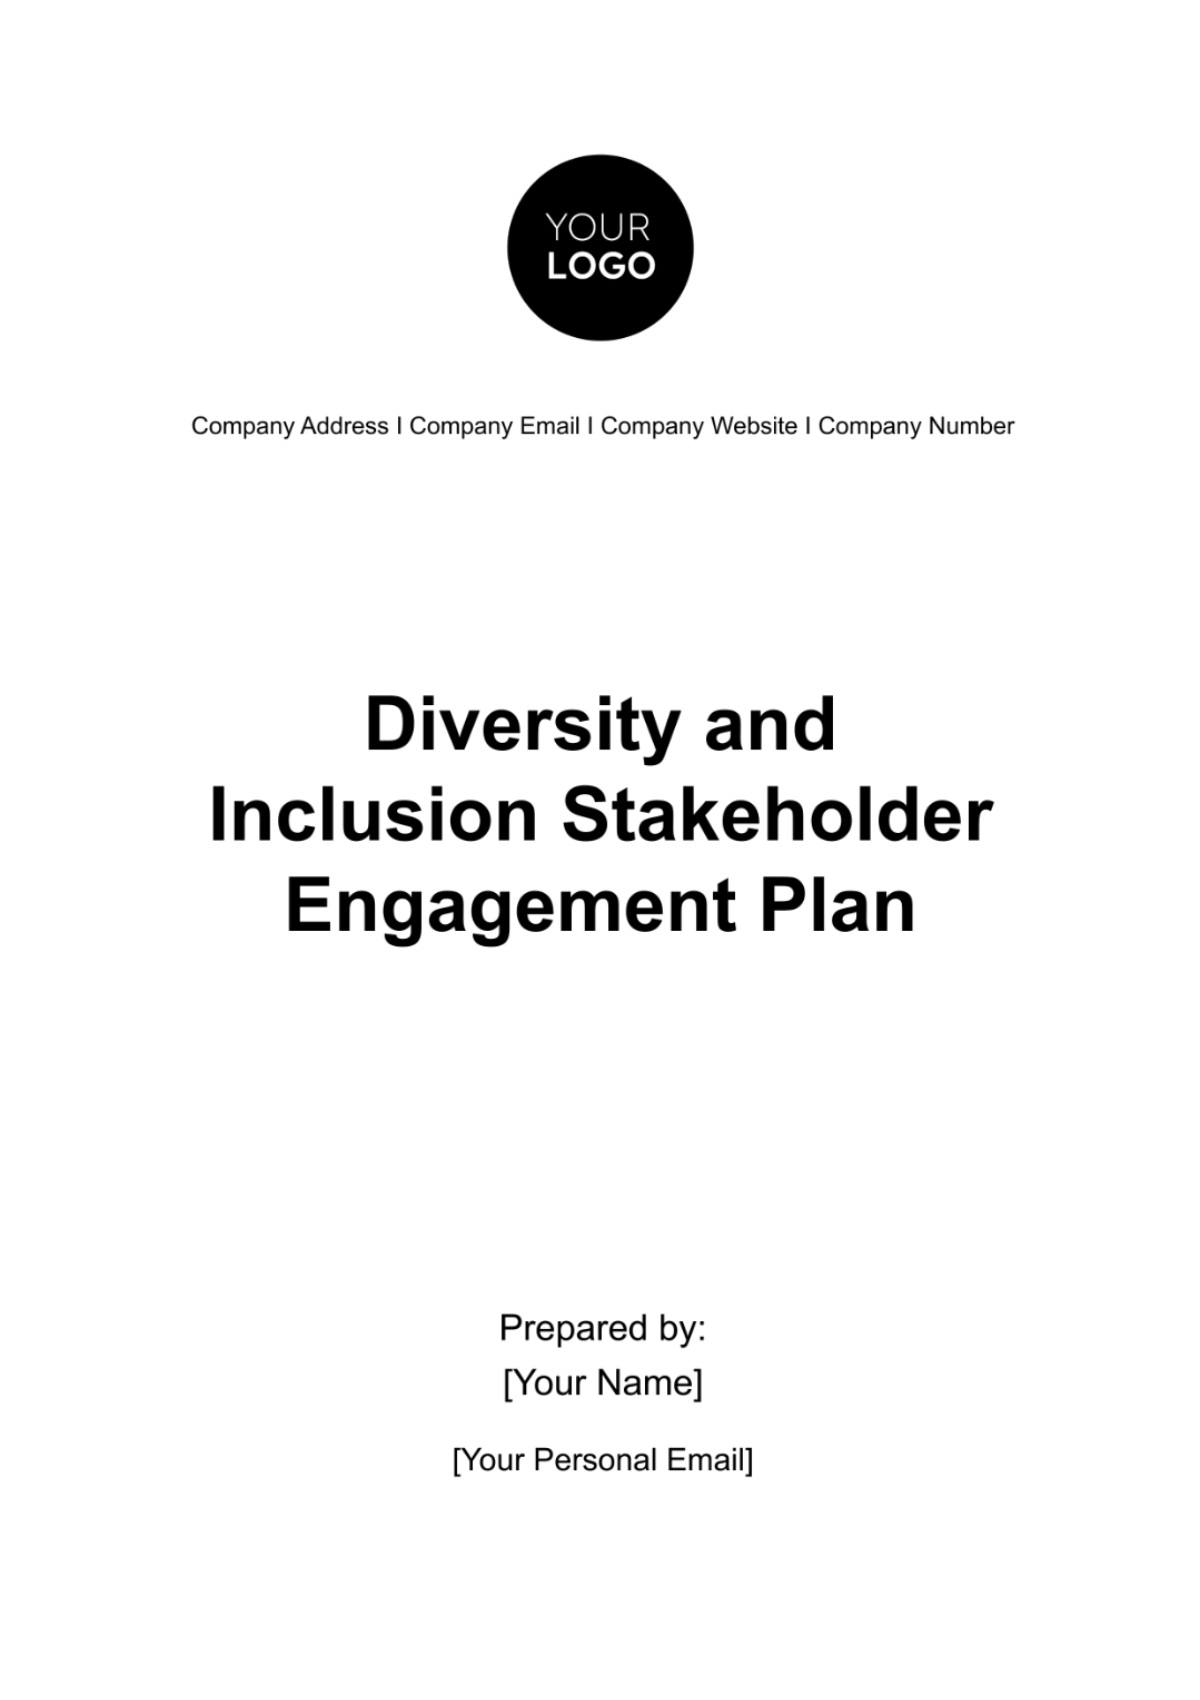 Free Diversity and Inclusion Stakeholder Engagement Plan HR Template